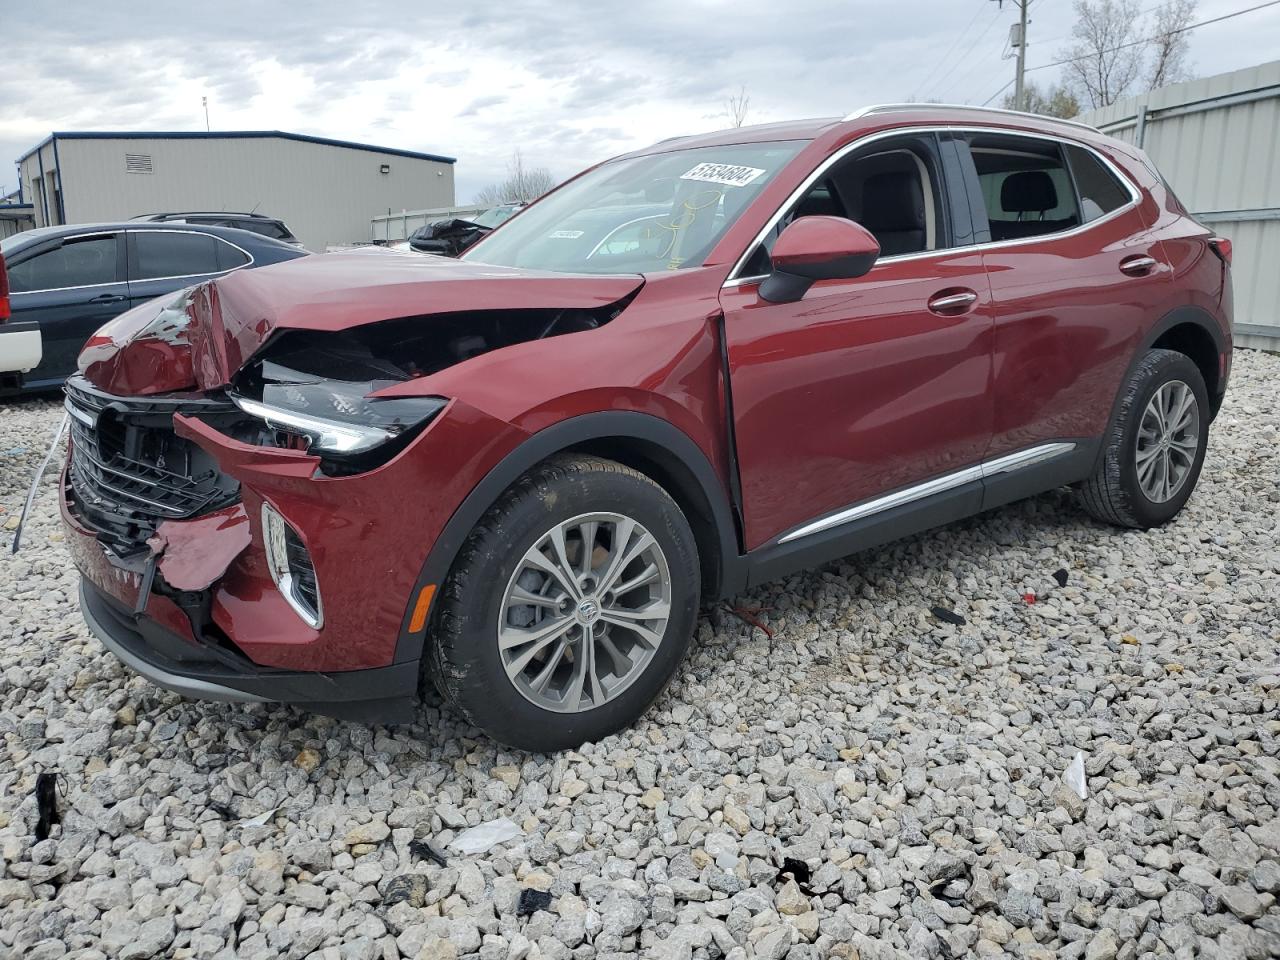 VIN: LRBFZMR40PD179137 - buick envision